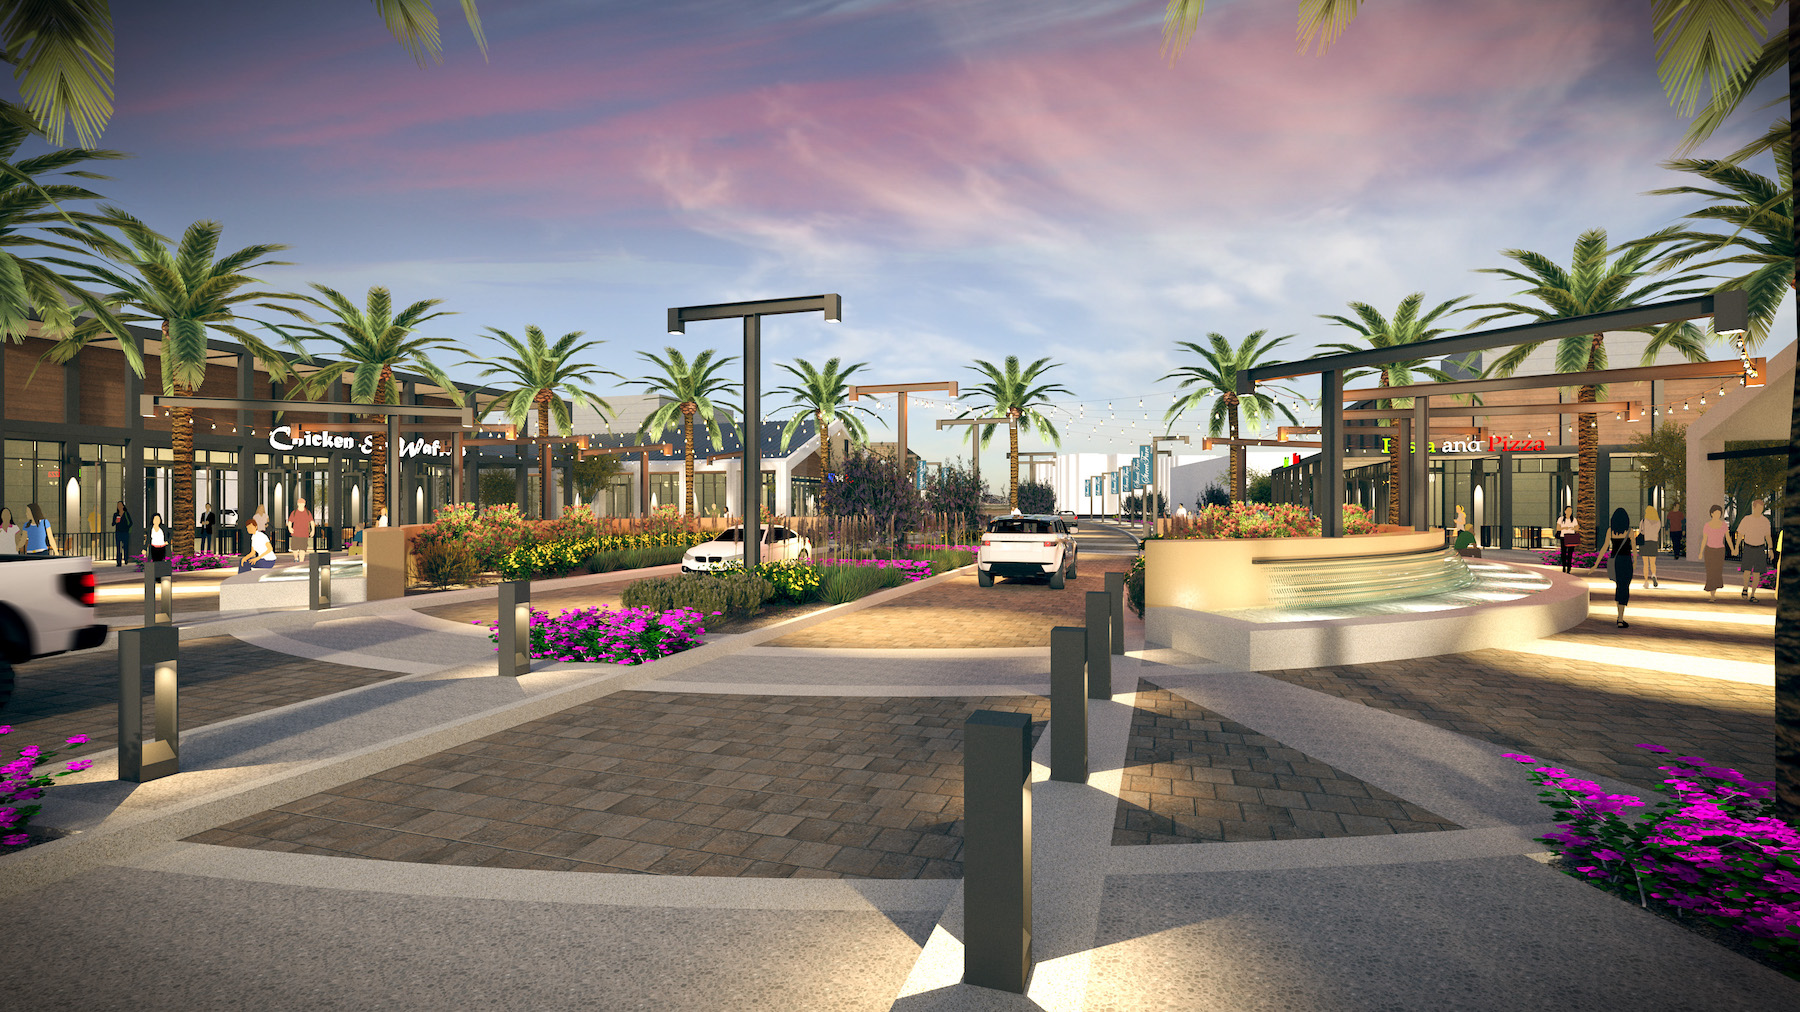 The outdoor mall will include restaurants and entertainment venues.